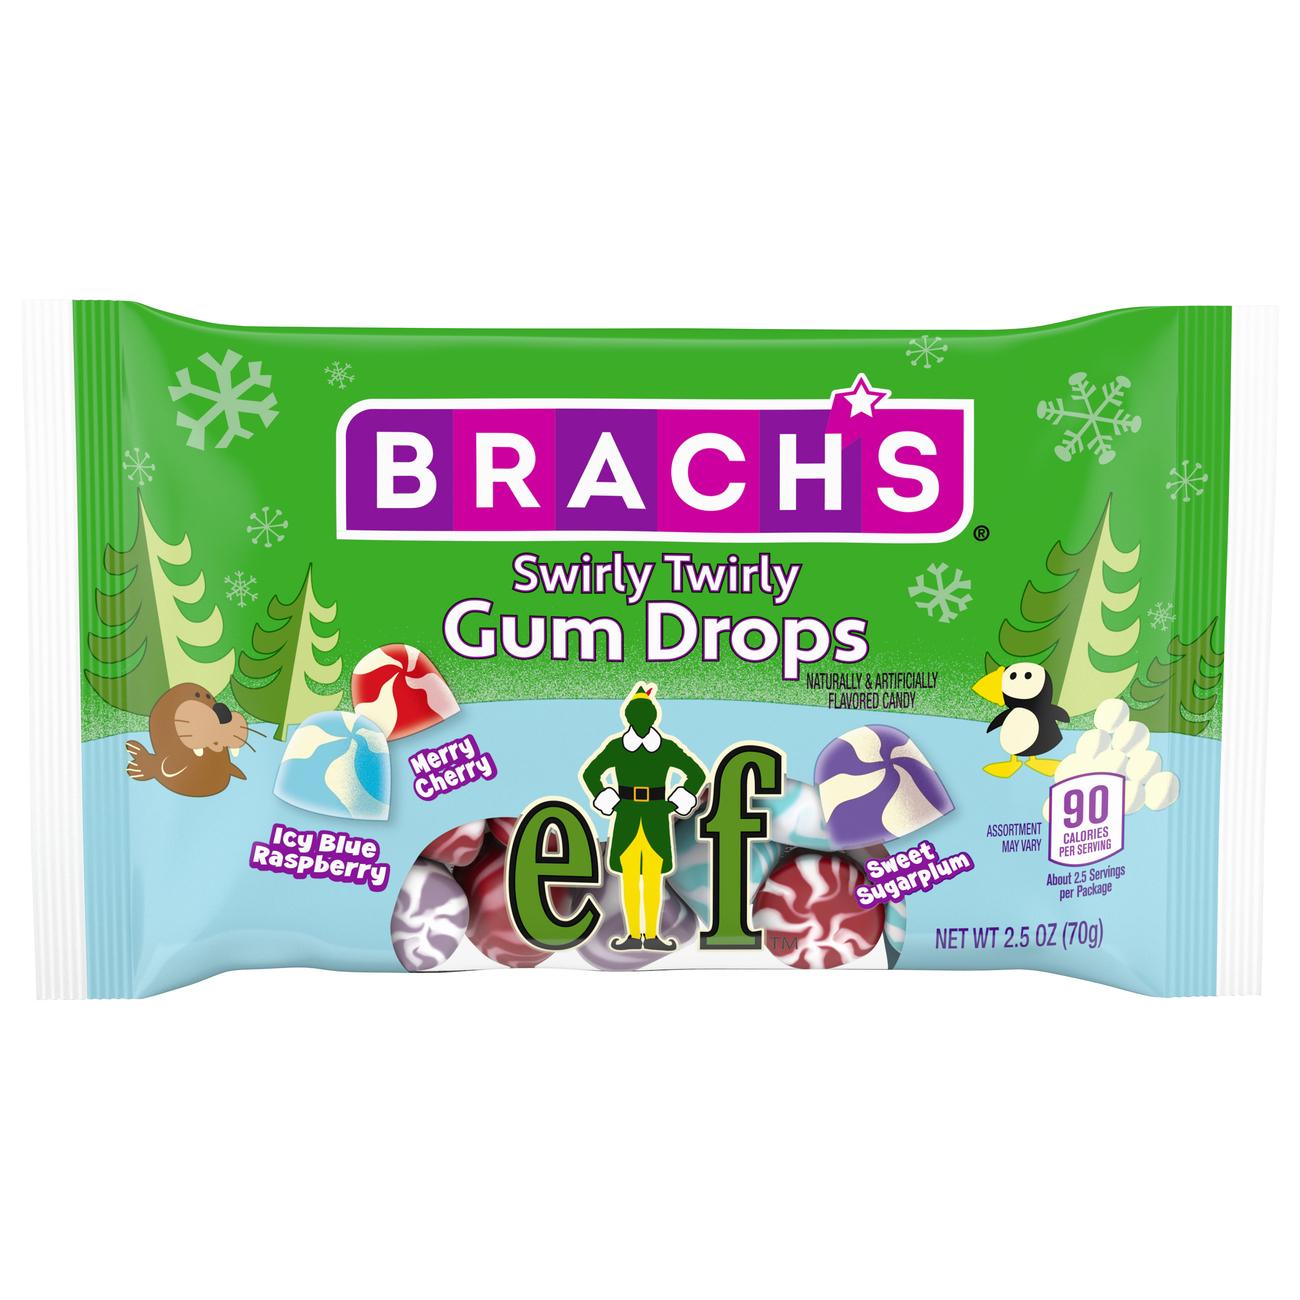 Brach's Swirly Twirly Gum Drops Holiday Candy - Shop Candy at H-E-B